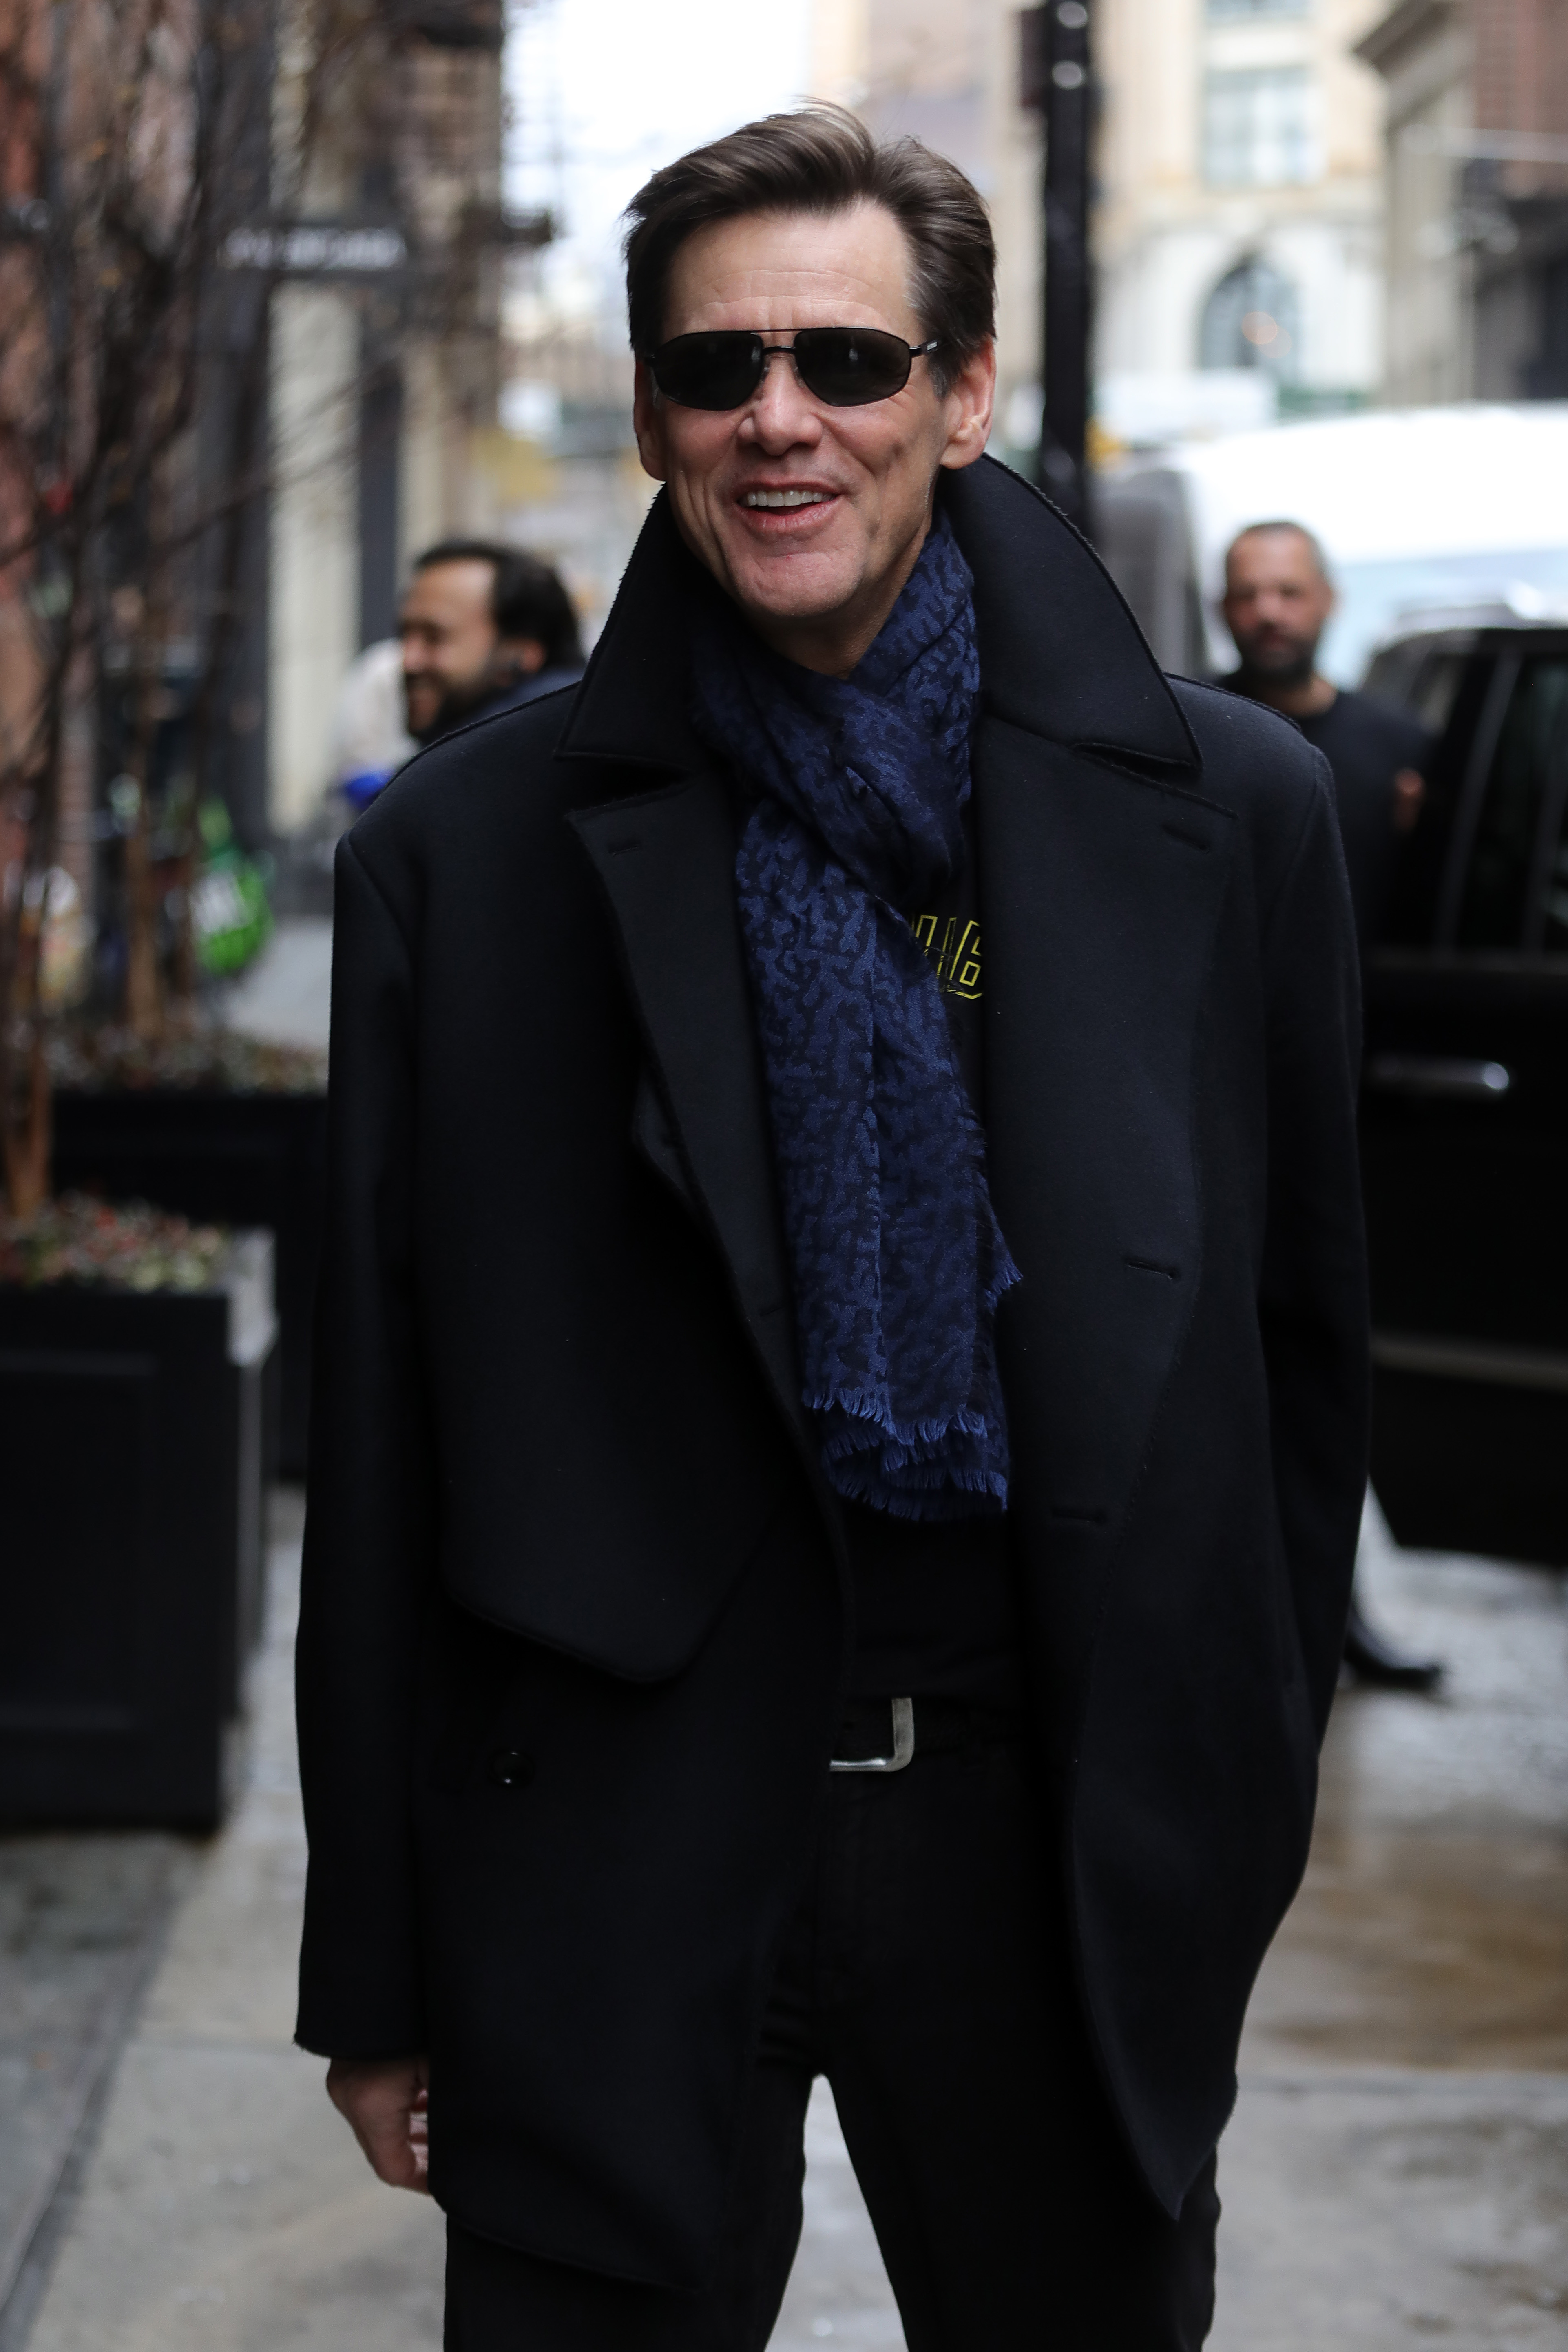 Jim Carrey spotted in New York City on February 7, 2020 | Source: Getty Images